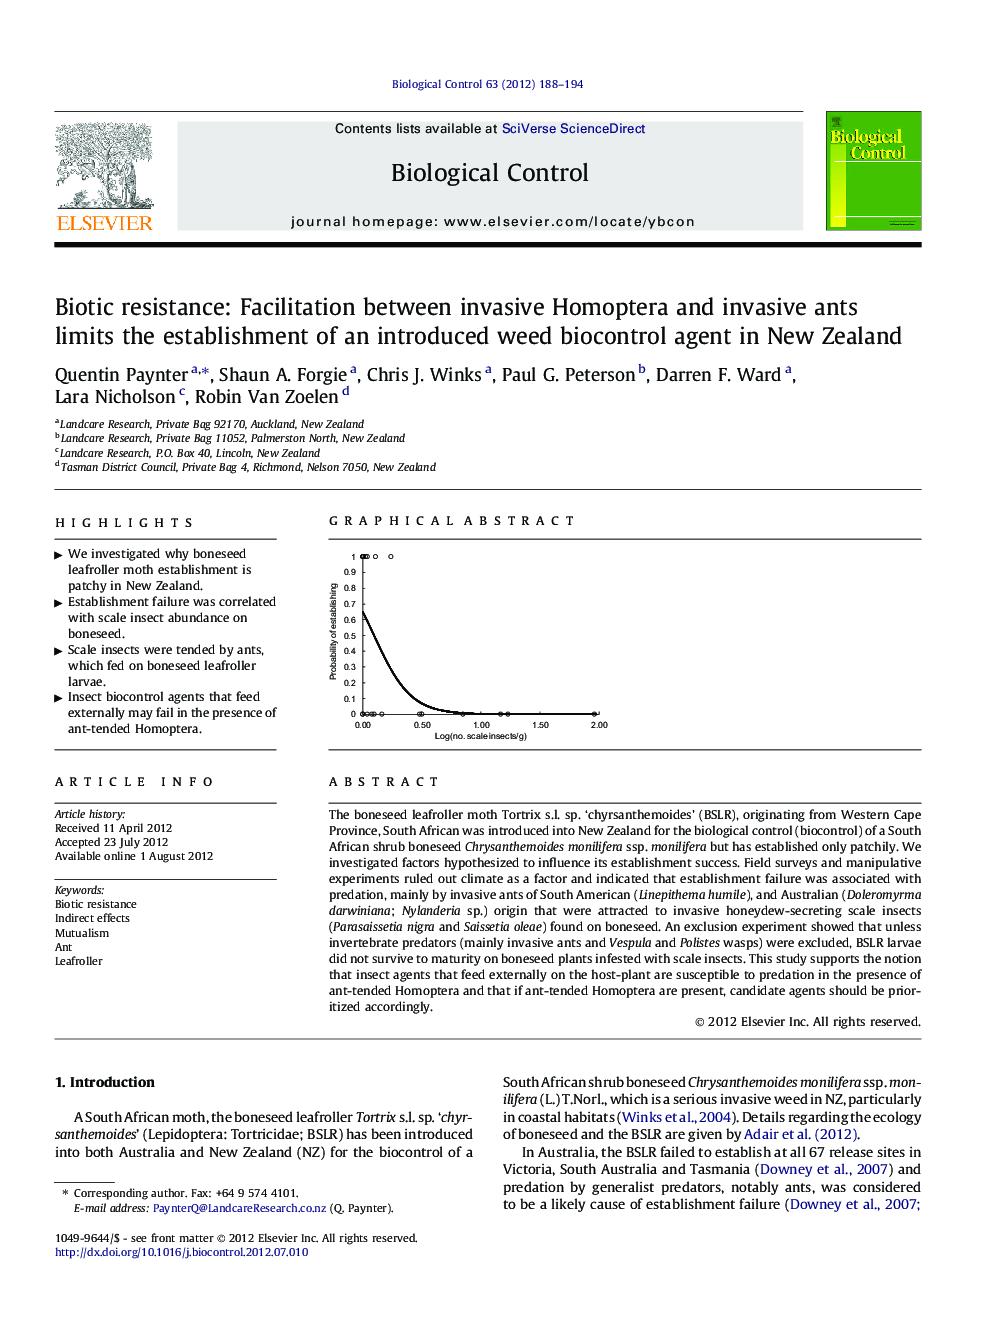 Biotic resistance: Facilitation between invasive Homoptera and invasive ants limits the establishment of an introduced weed biocontrol agent in New Zealand